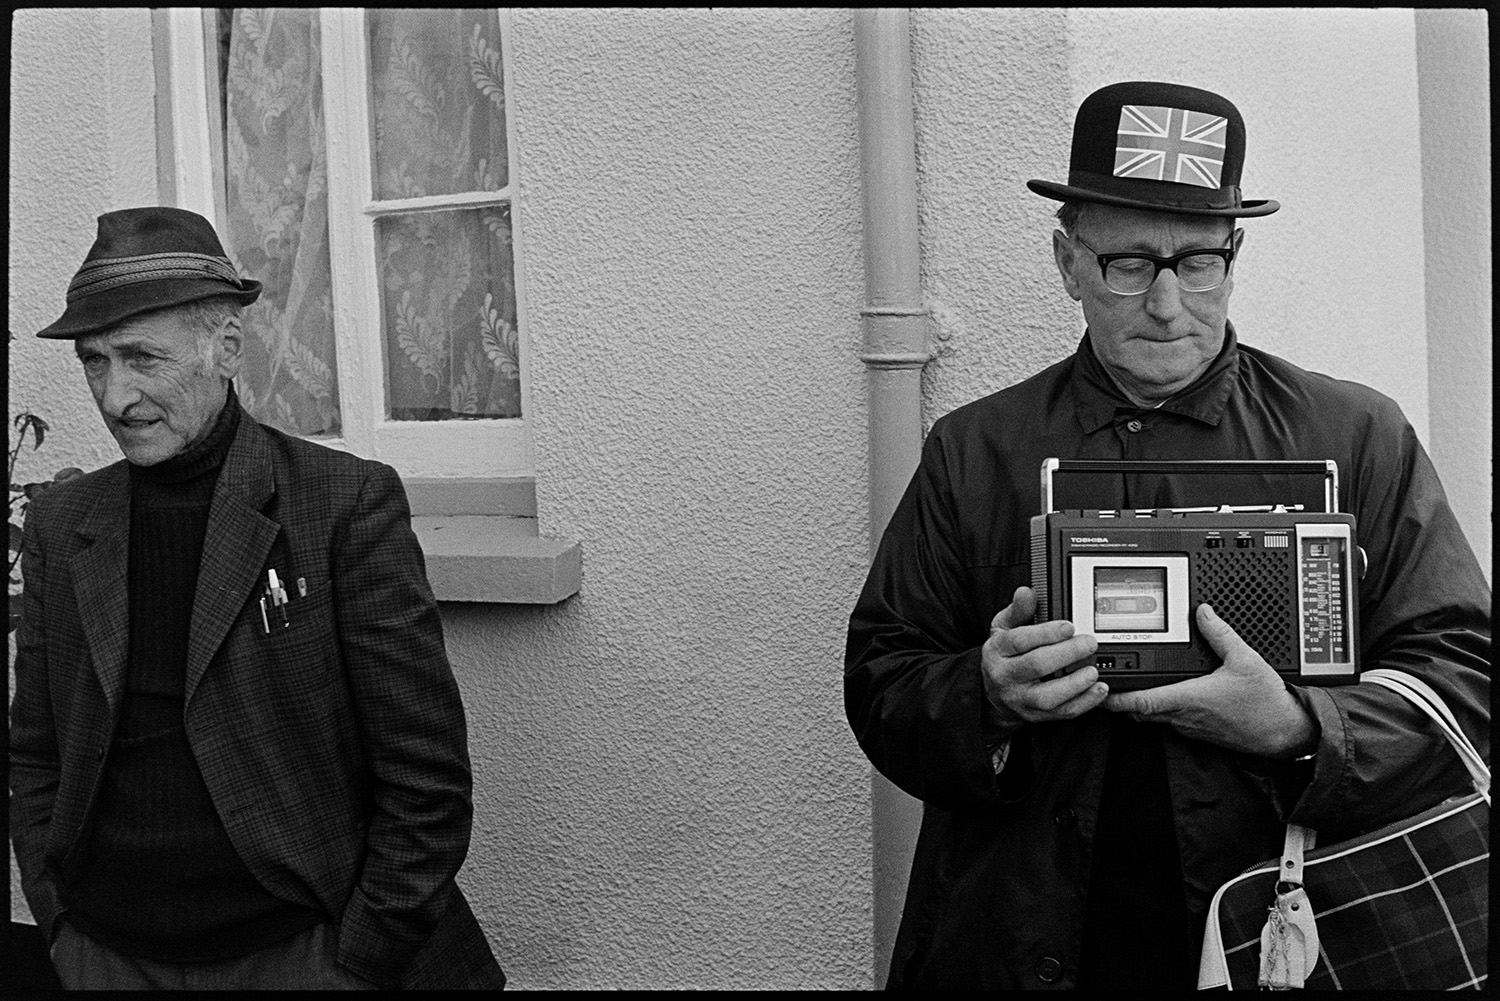 Spectators in square, Jubilee Day, man with radio. 
[Jack Marden holding a tape recorder and watching the celebrations for the Silver Jubilee of Queen Elizabeth II in Dolton village square. He is wearing a hat decorated with a Union Jack flag and stood next to another man.]